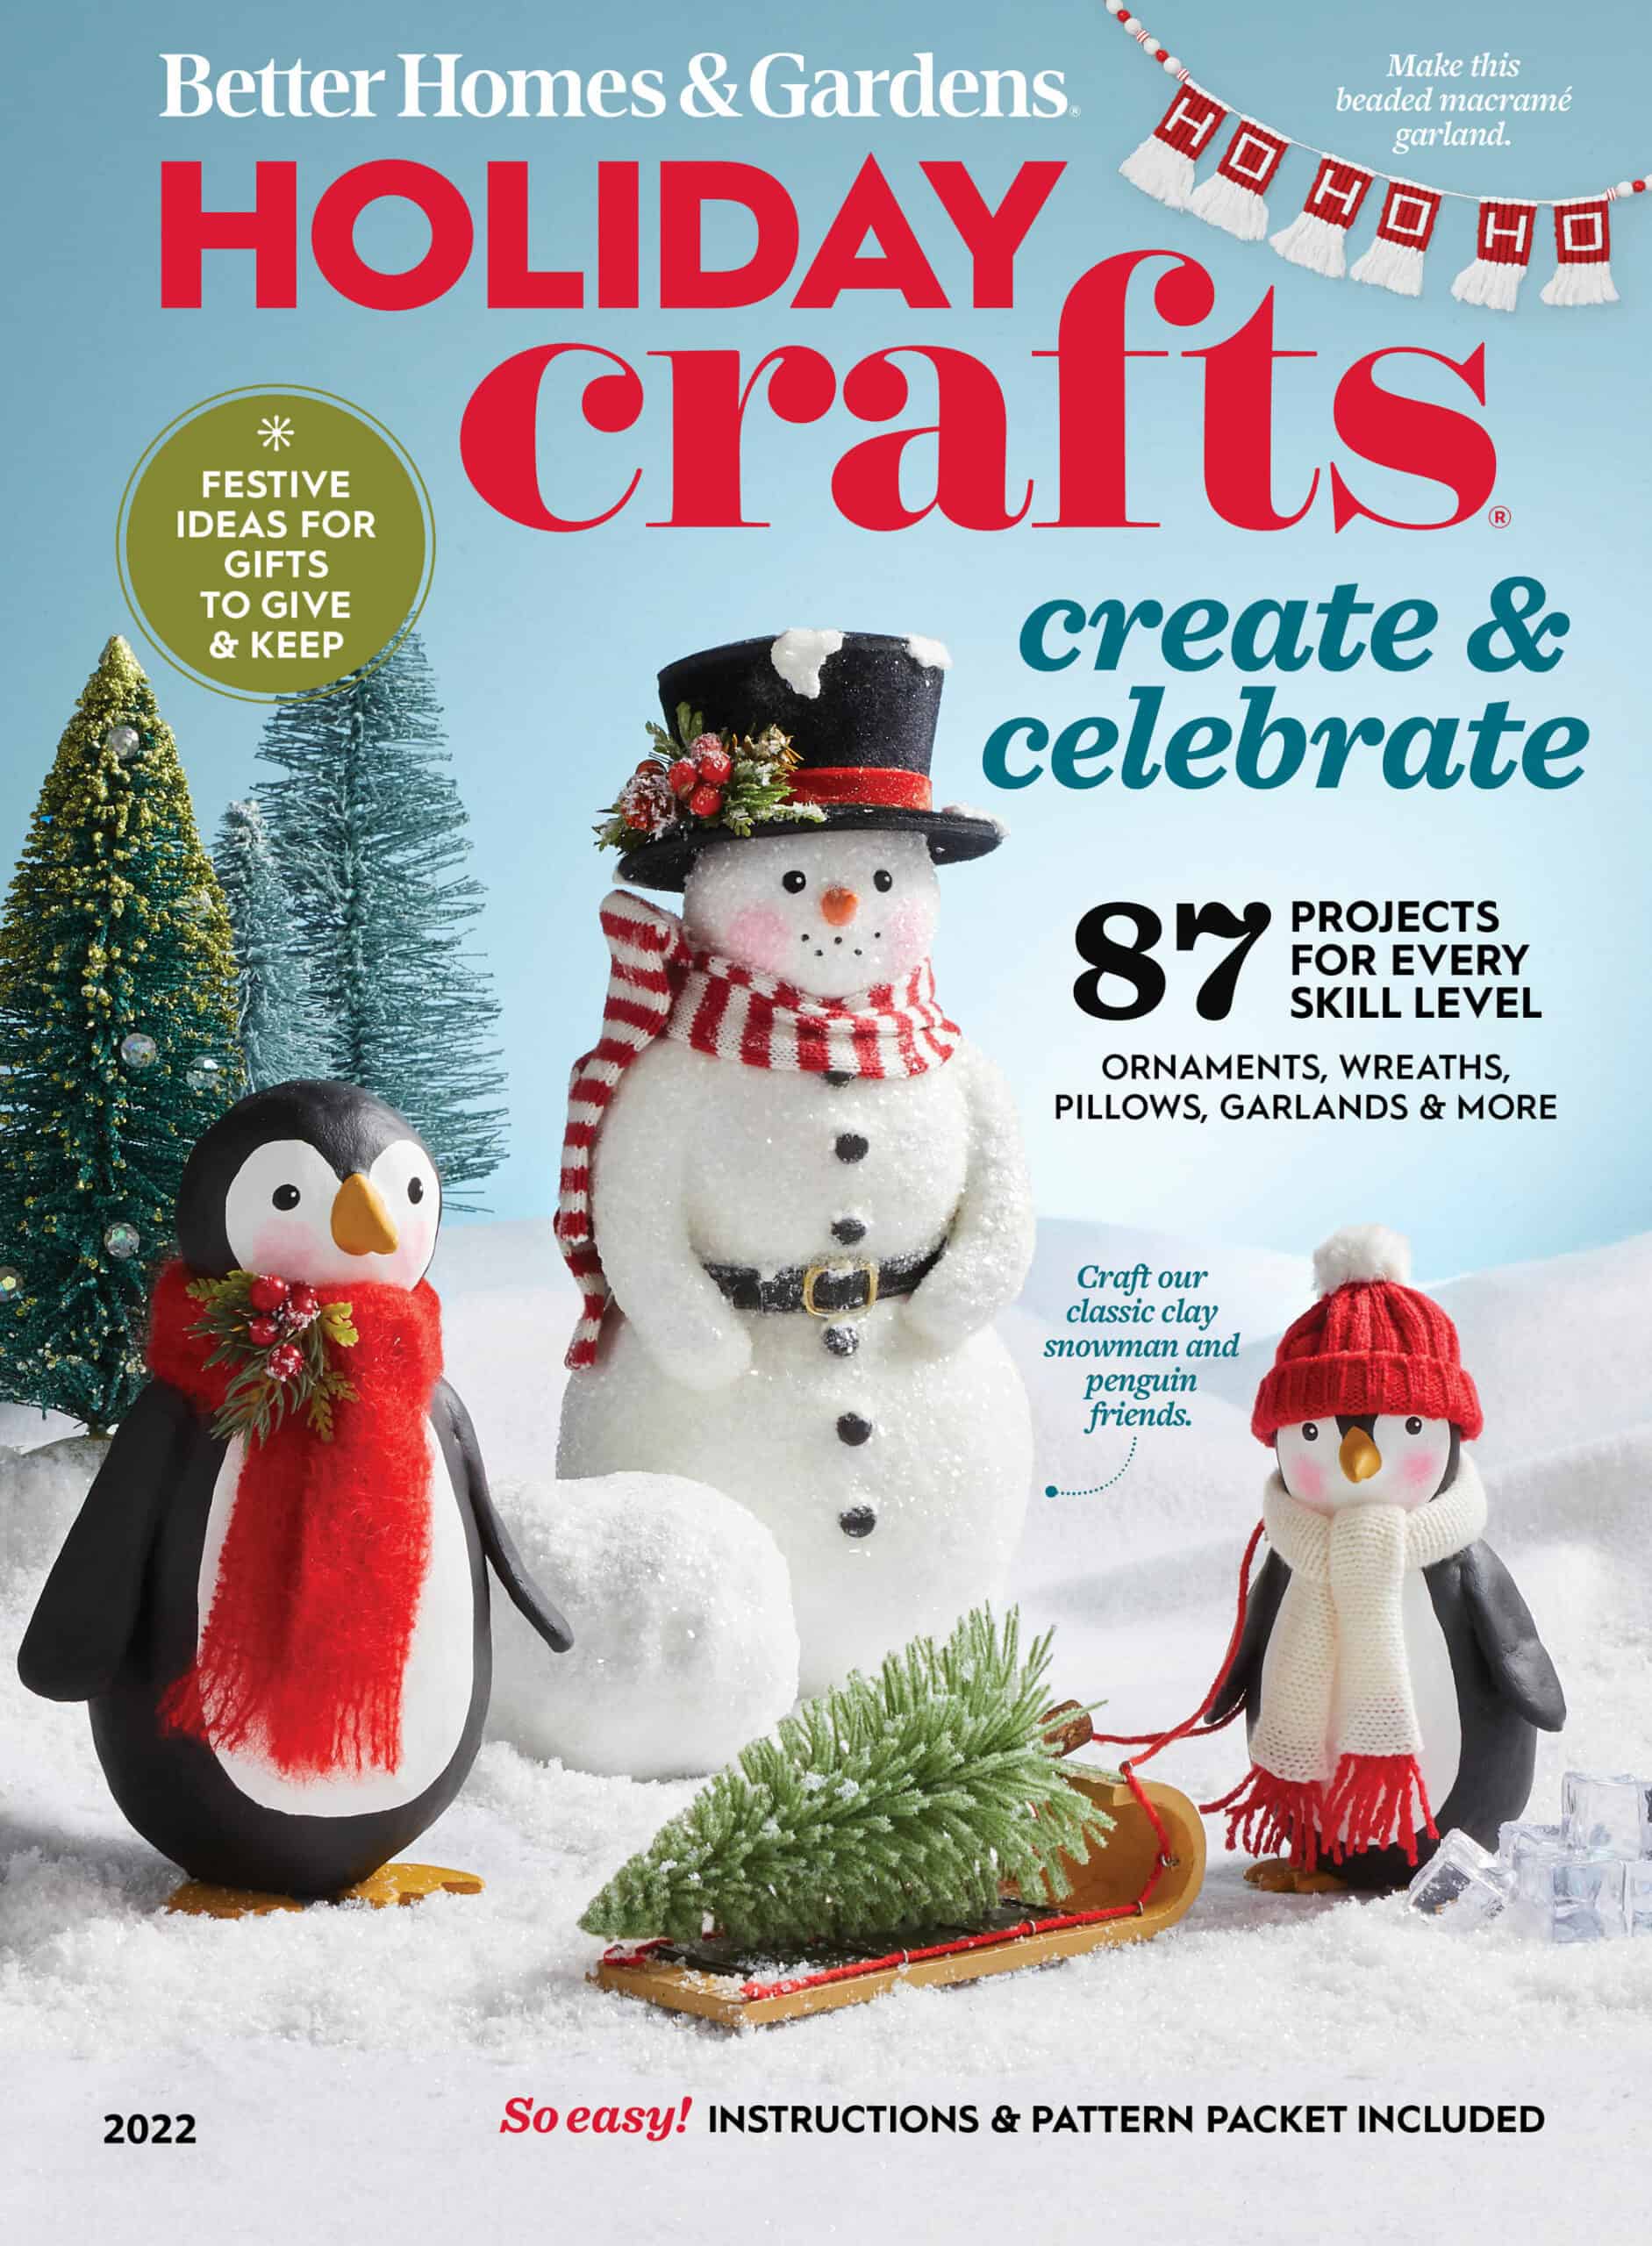 better homes and gardens magazine cover 2022 holiday crafts edition